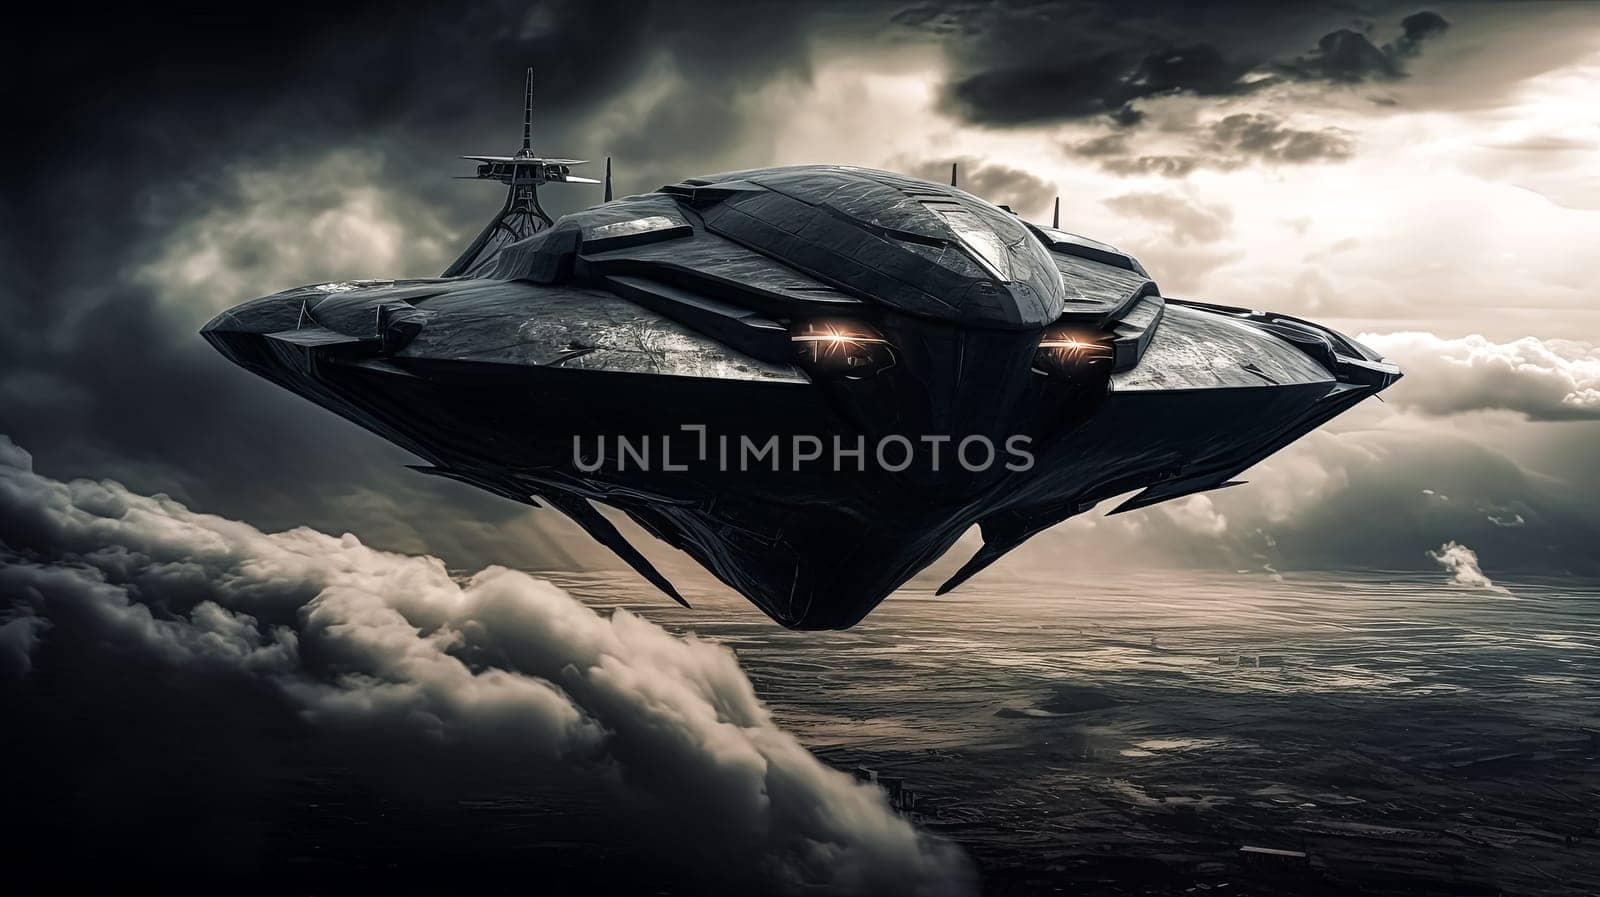 A large, futuristic space ship is flying through a cloudy sky. Scene is dark and mysterious, with the space ship being the only visible object in the scene